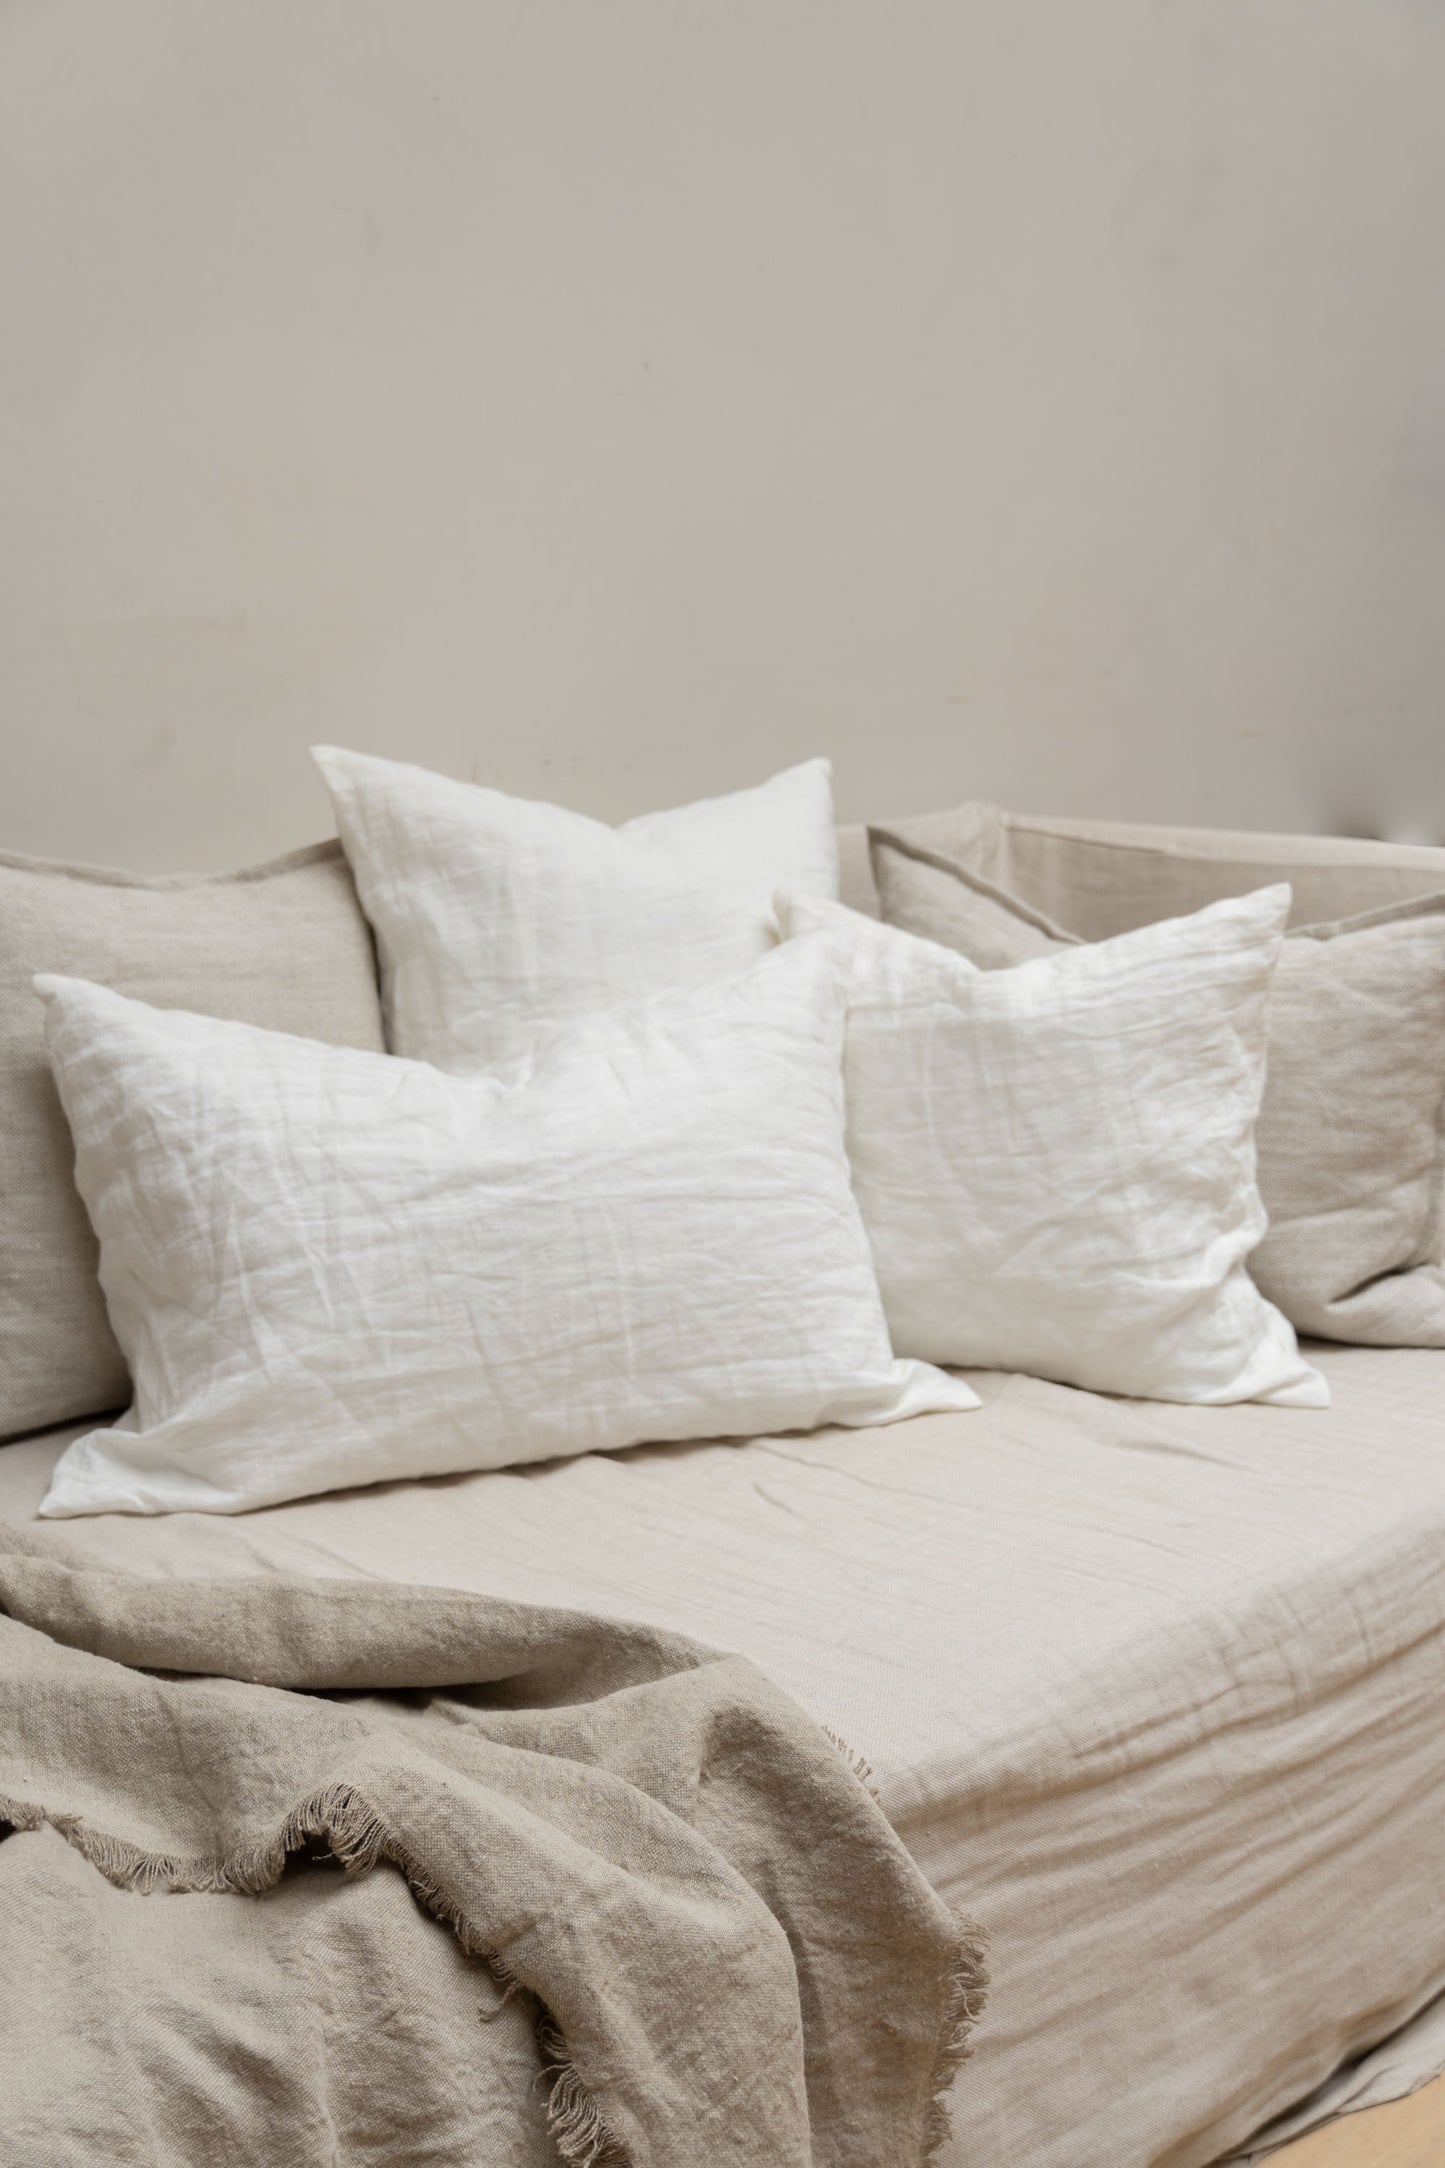 Linen Cushions by Timeless Linen in Off White set on couch in a light and neutral interior at Enter The Loft.